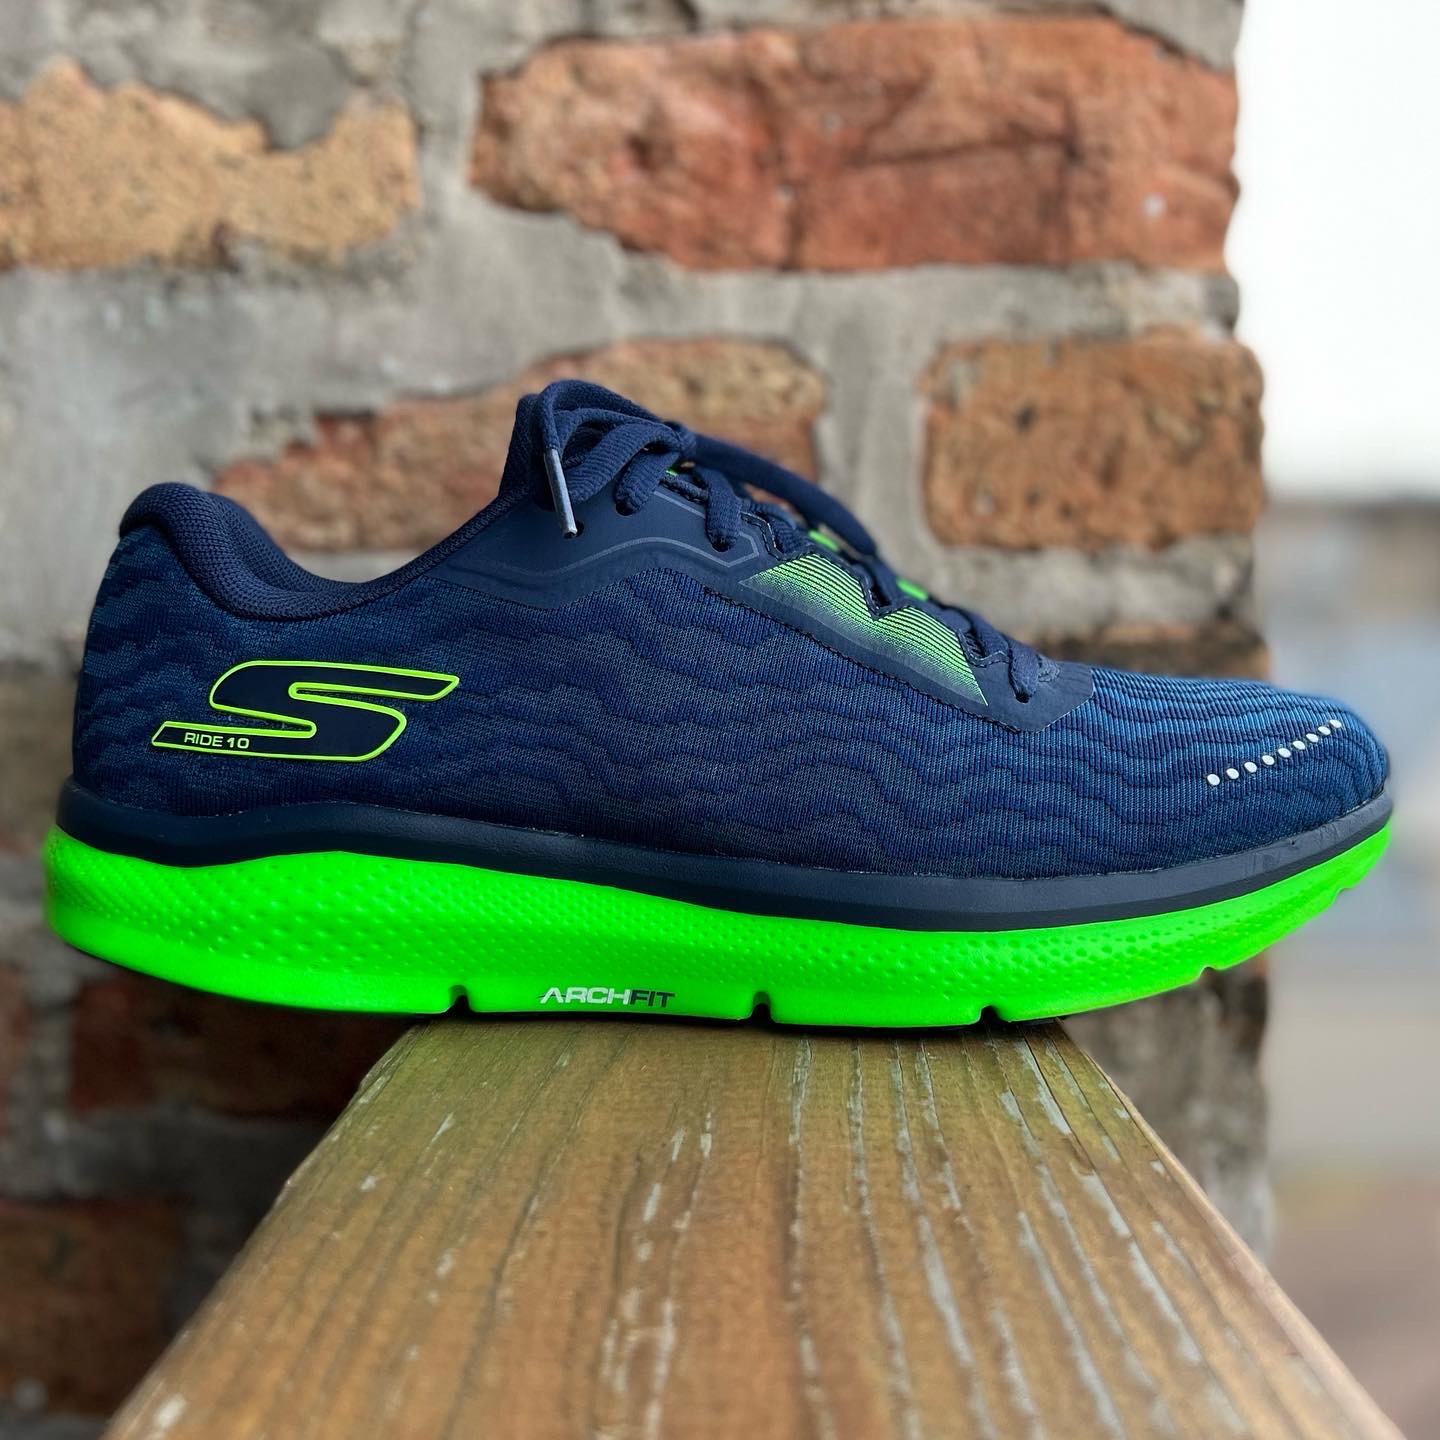 Road Trail Run: Skechers Performance GO Run Ride Multi Review at 50 Miles Plus: A Pleasant Light Everyday Trainer